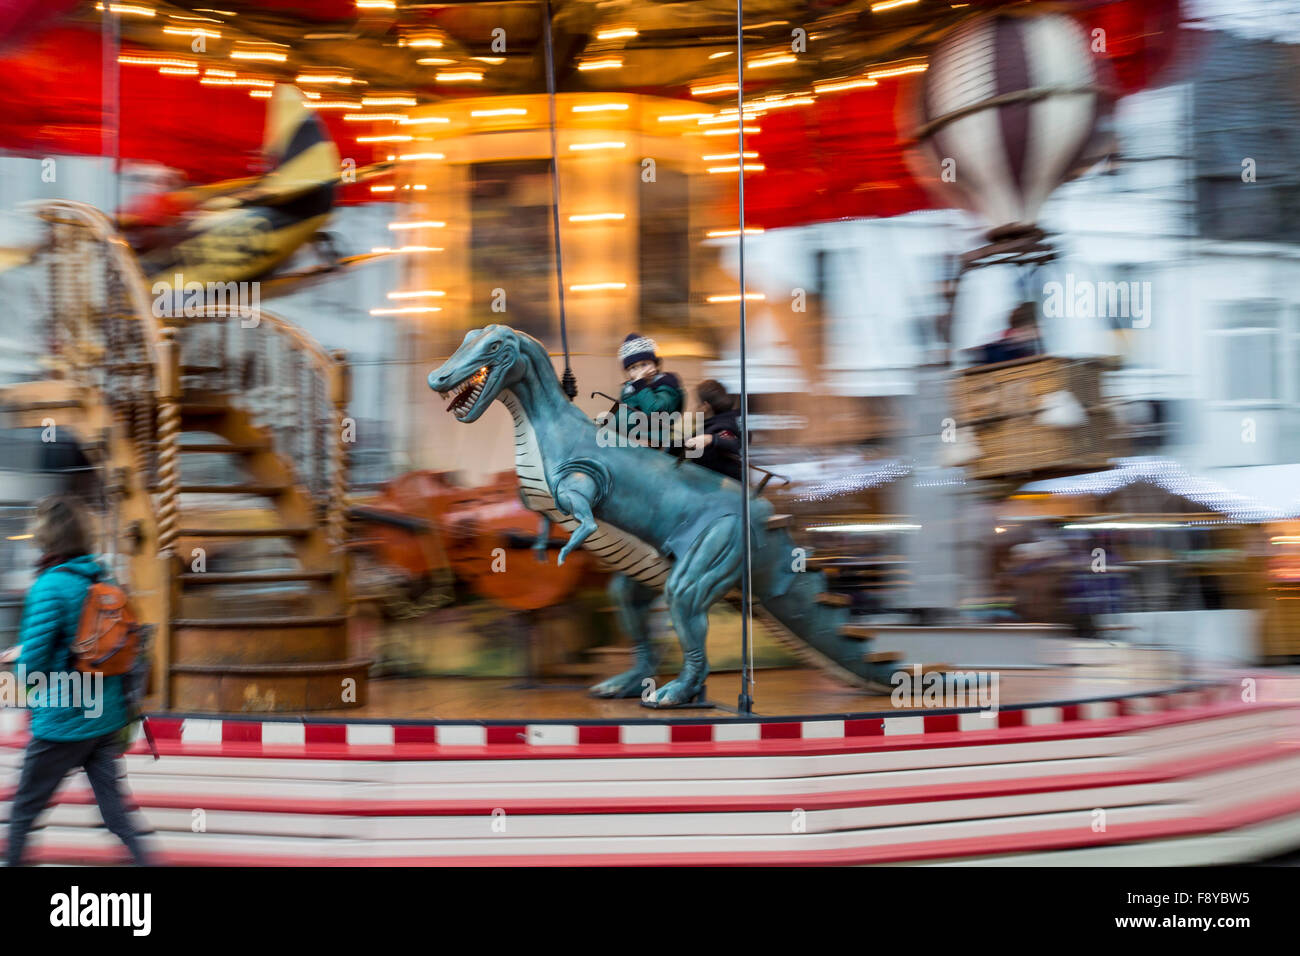 Christmas market in Brussels, Belgium, old fashioned carousel, Stock Photo